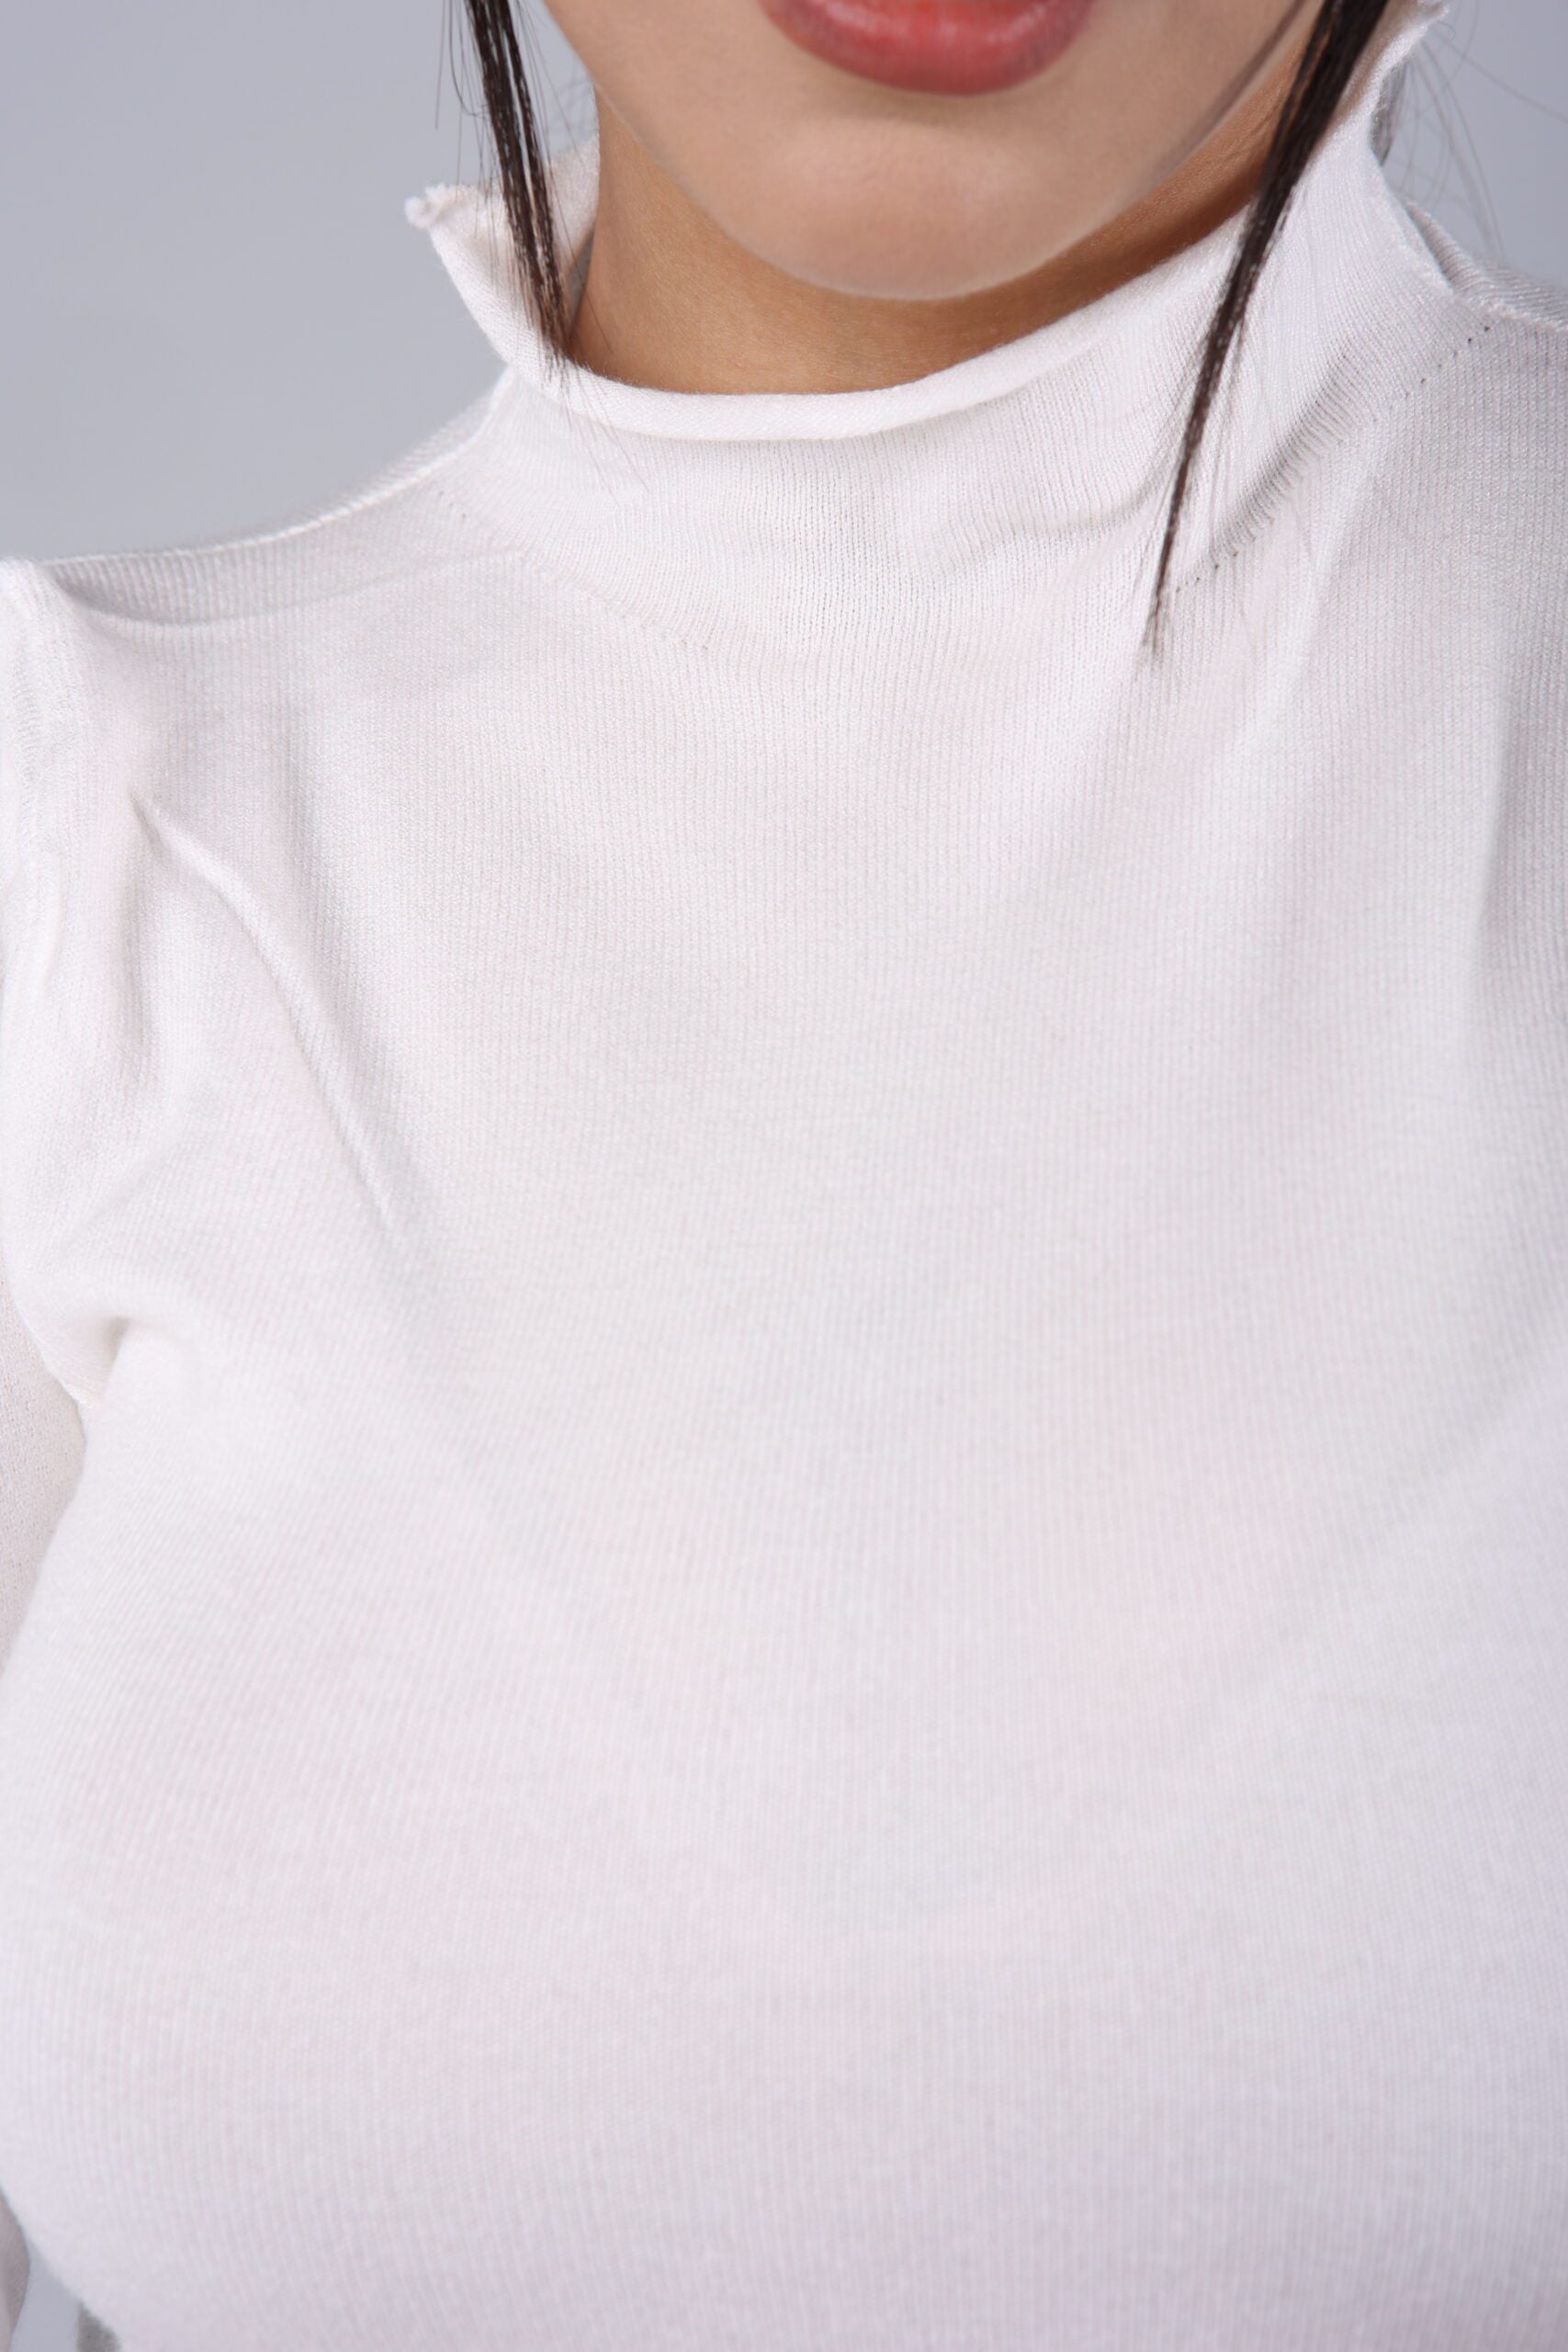 T-neck Basic Knitted Top (White) A Timeless Wardrobe Essential for Effortless Style and Comfort!